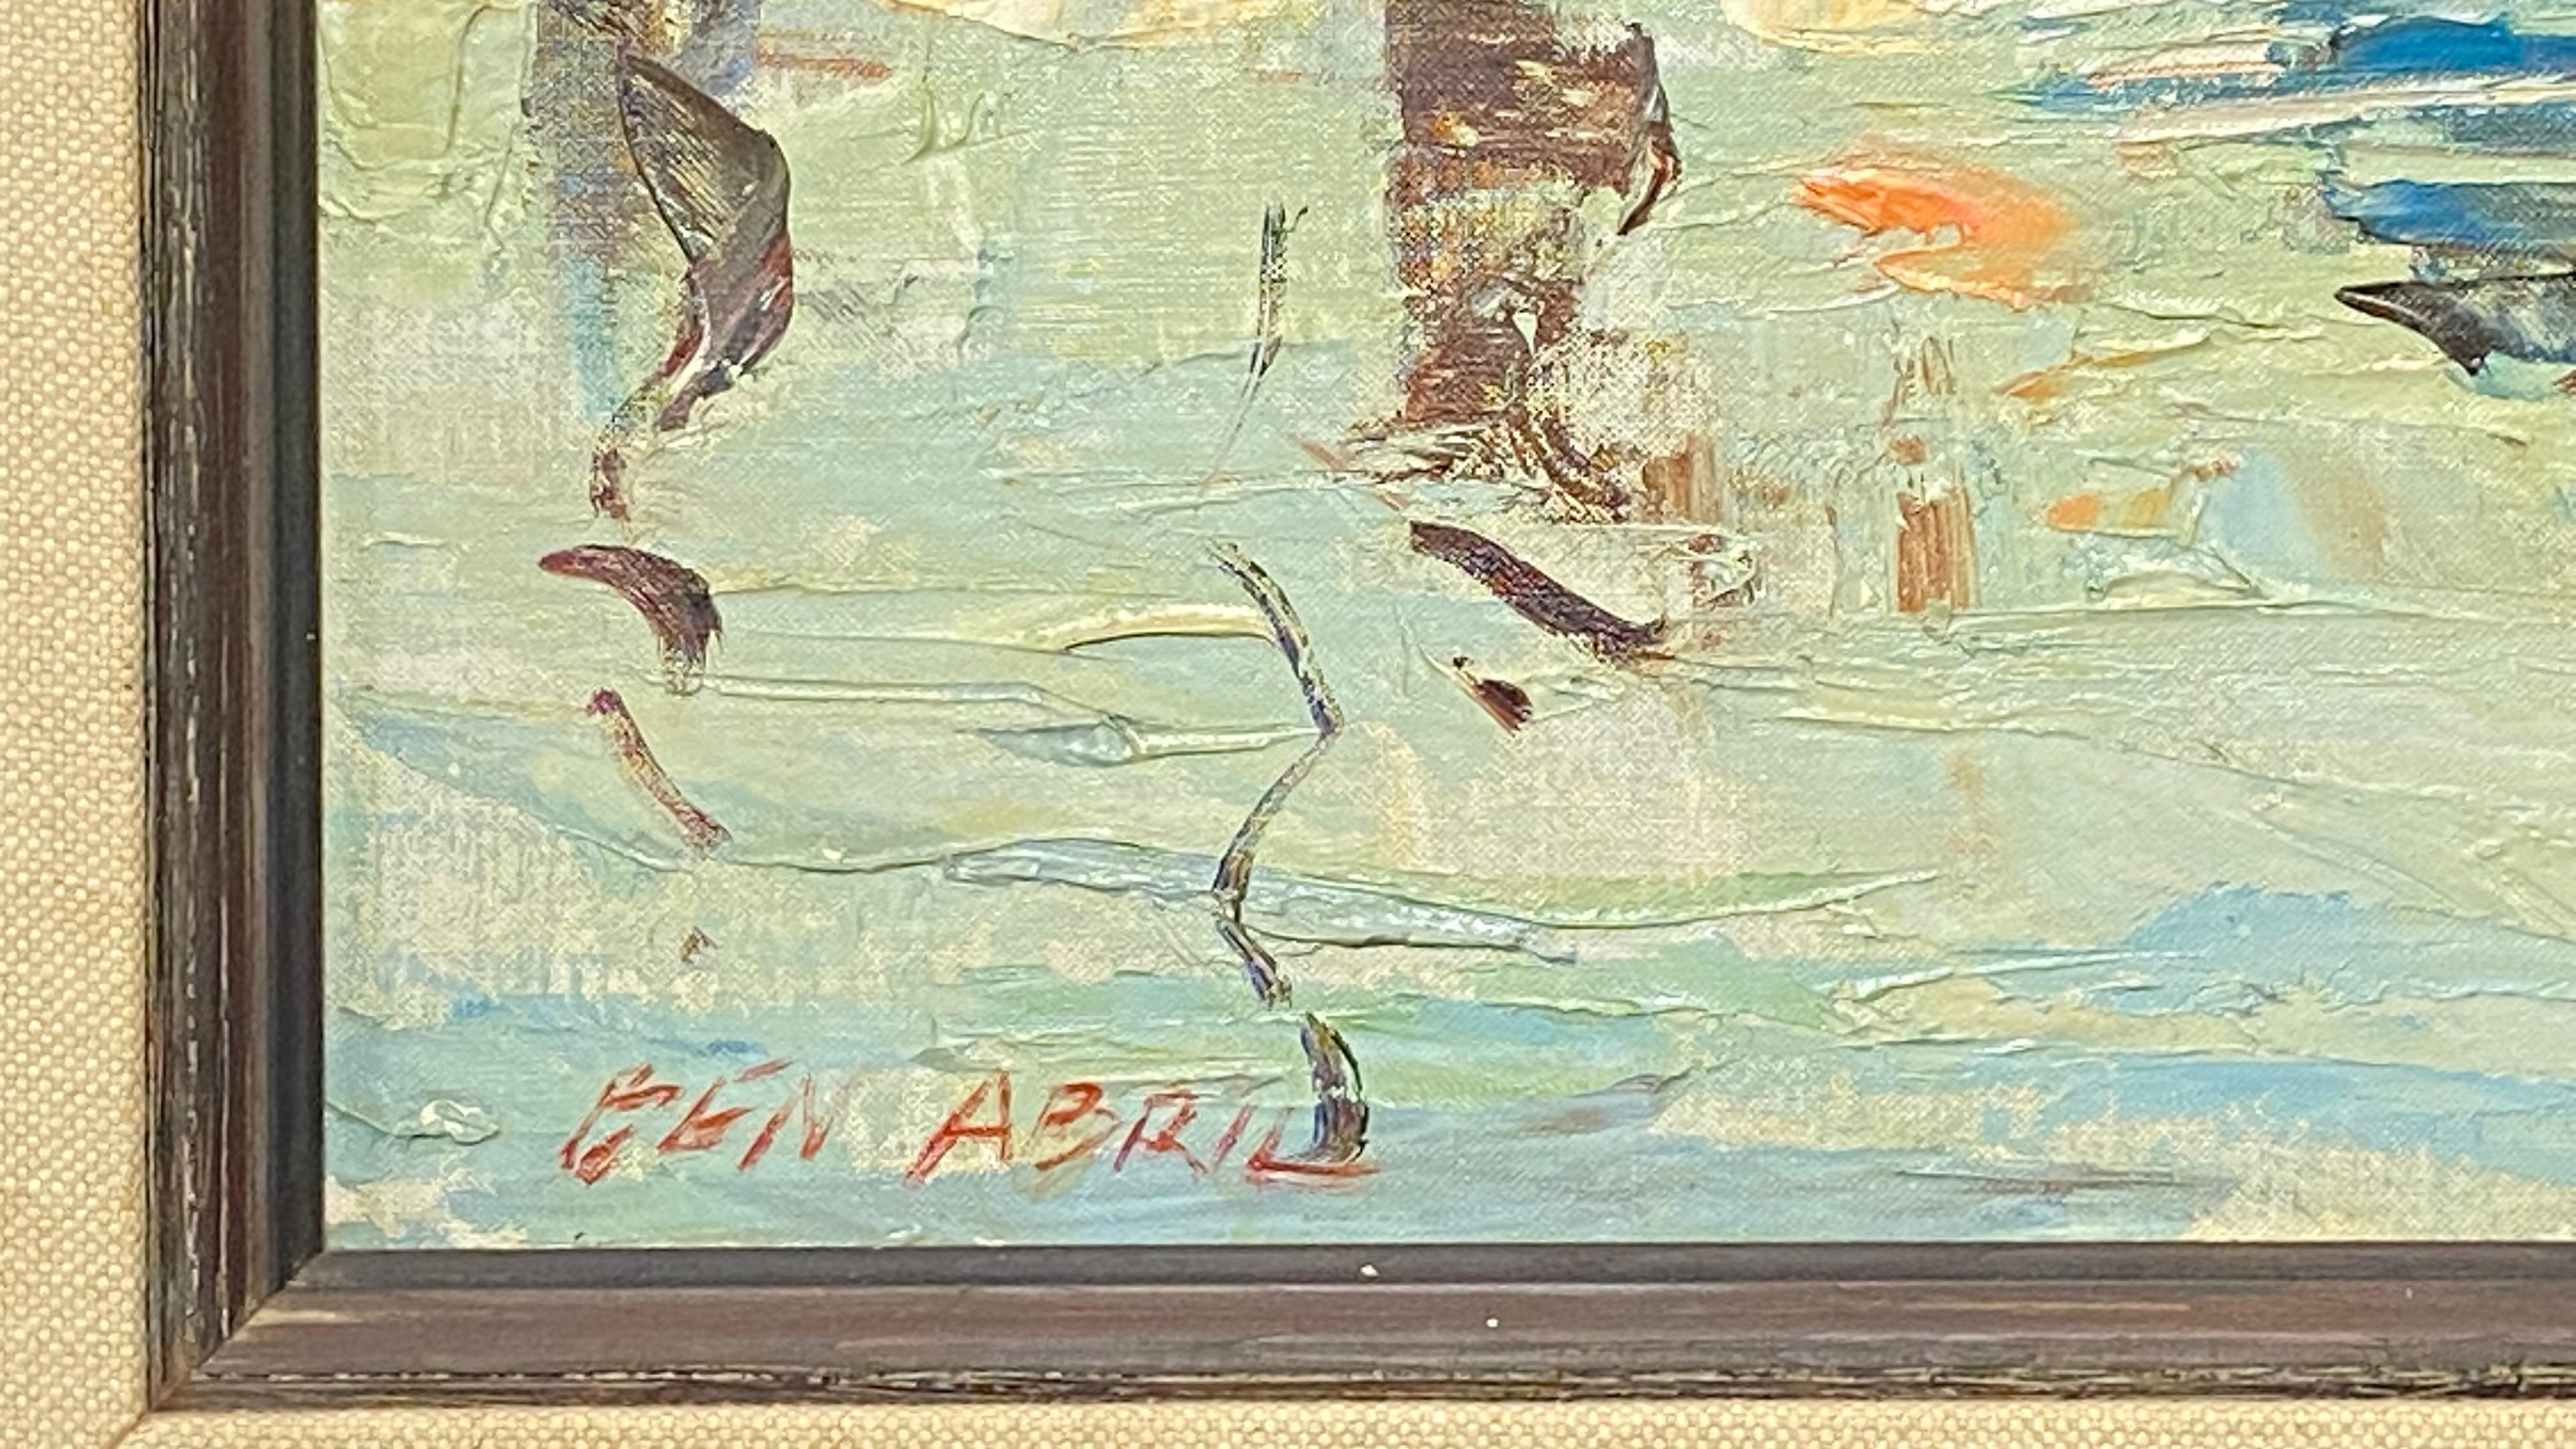 Hand-Painted Fishing Boat Scene Painting by California Artist Ben Abril, Mid-20th Century For Sale